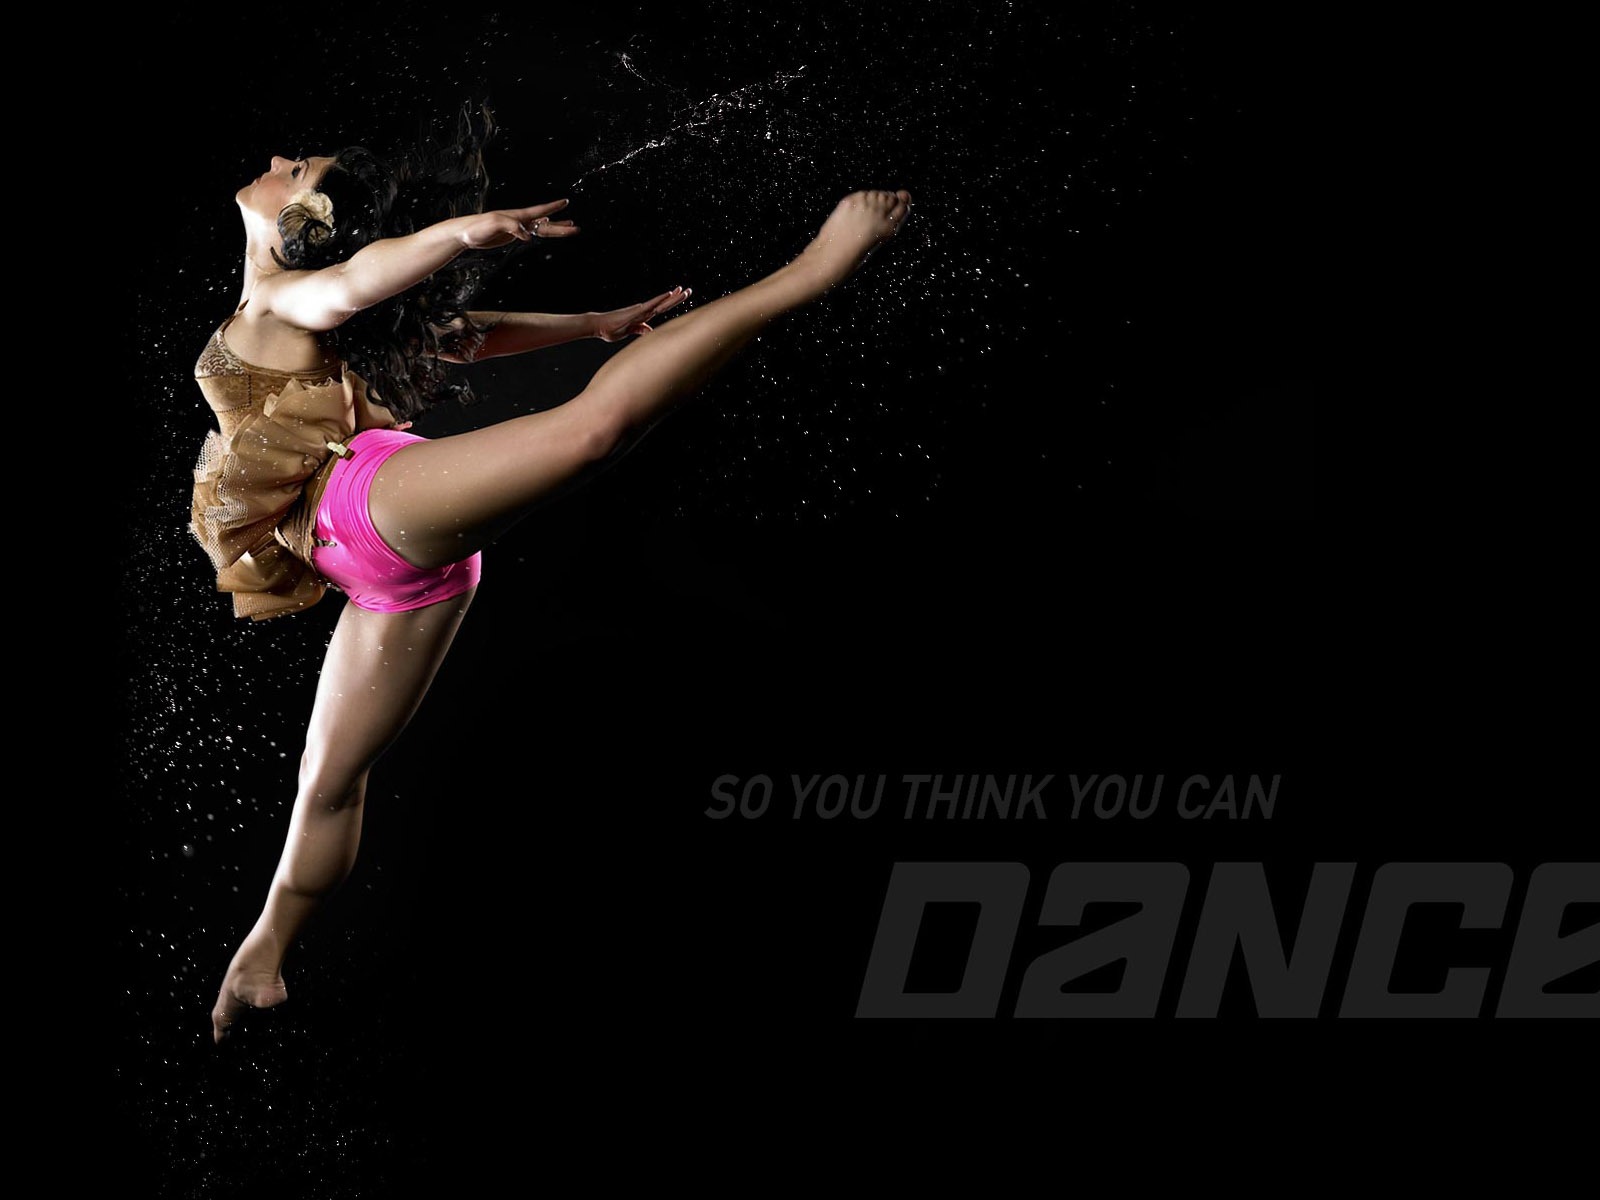 So You Think You Can Dance wallpaper (1) #17 - 1600x1200